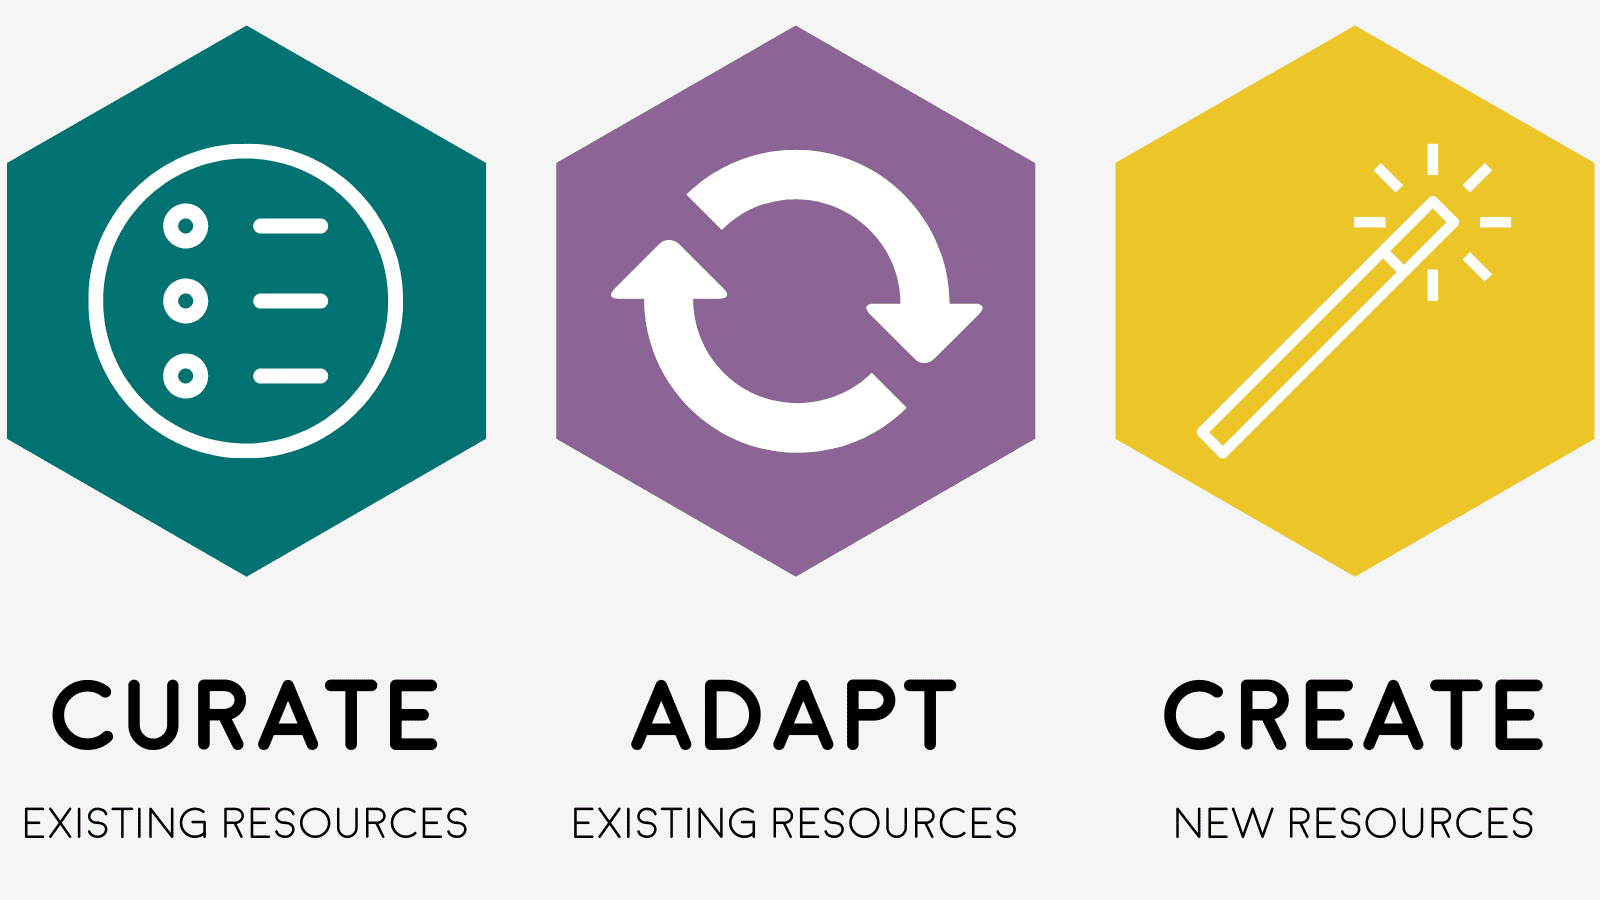 3 hexagons with icons (a list, a circle with arrows, and a wand) and the text, curate existing resources, update existing, adapt existing resources, create new resources